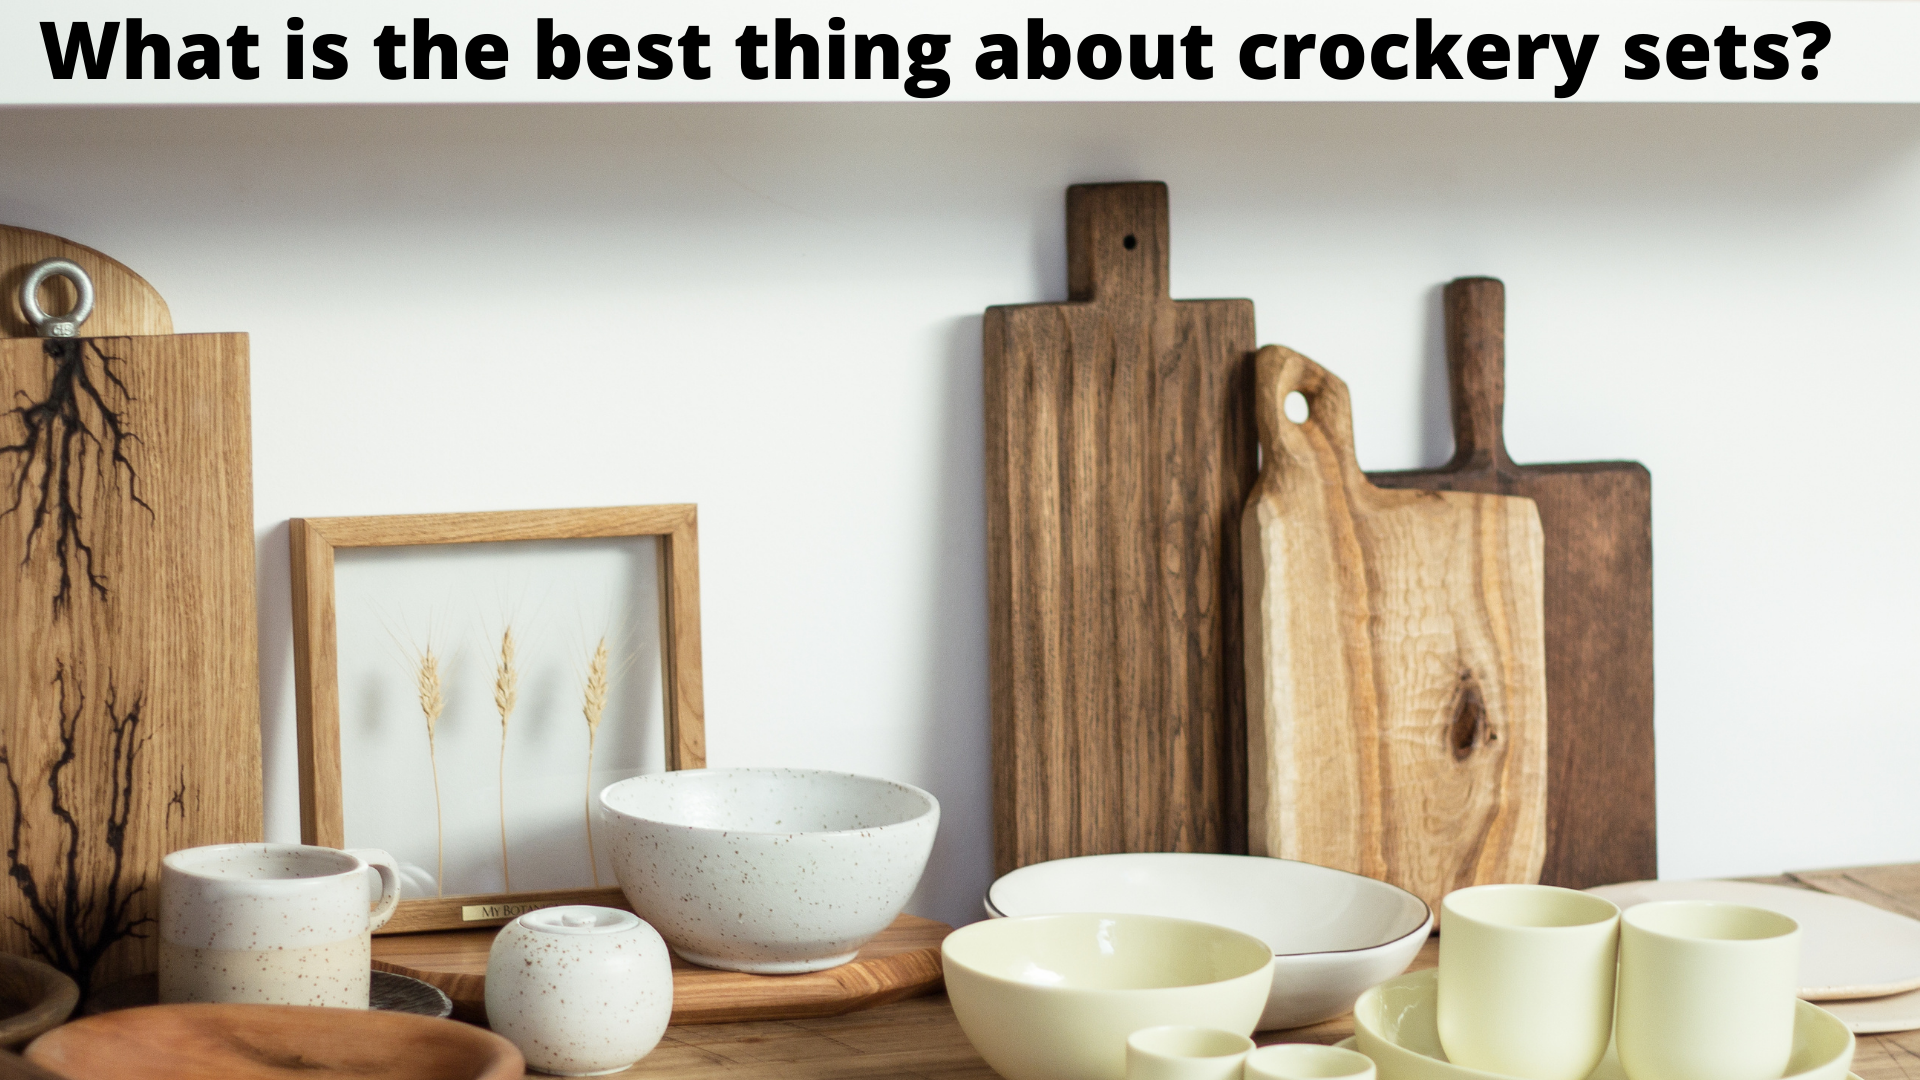 What is the best thing about the crockery sets